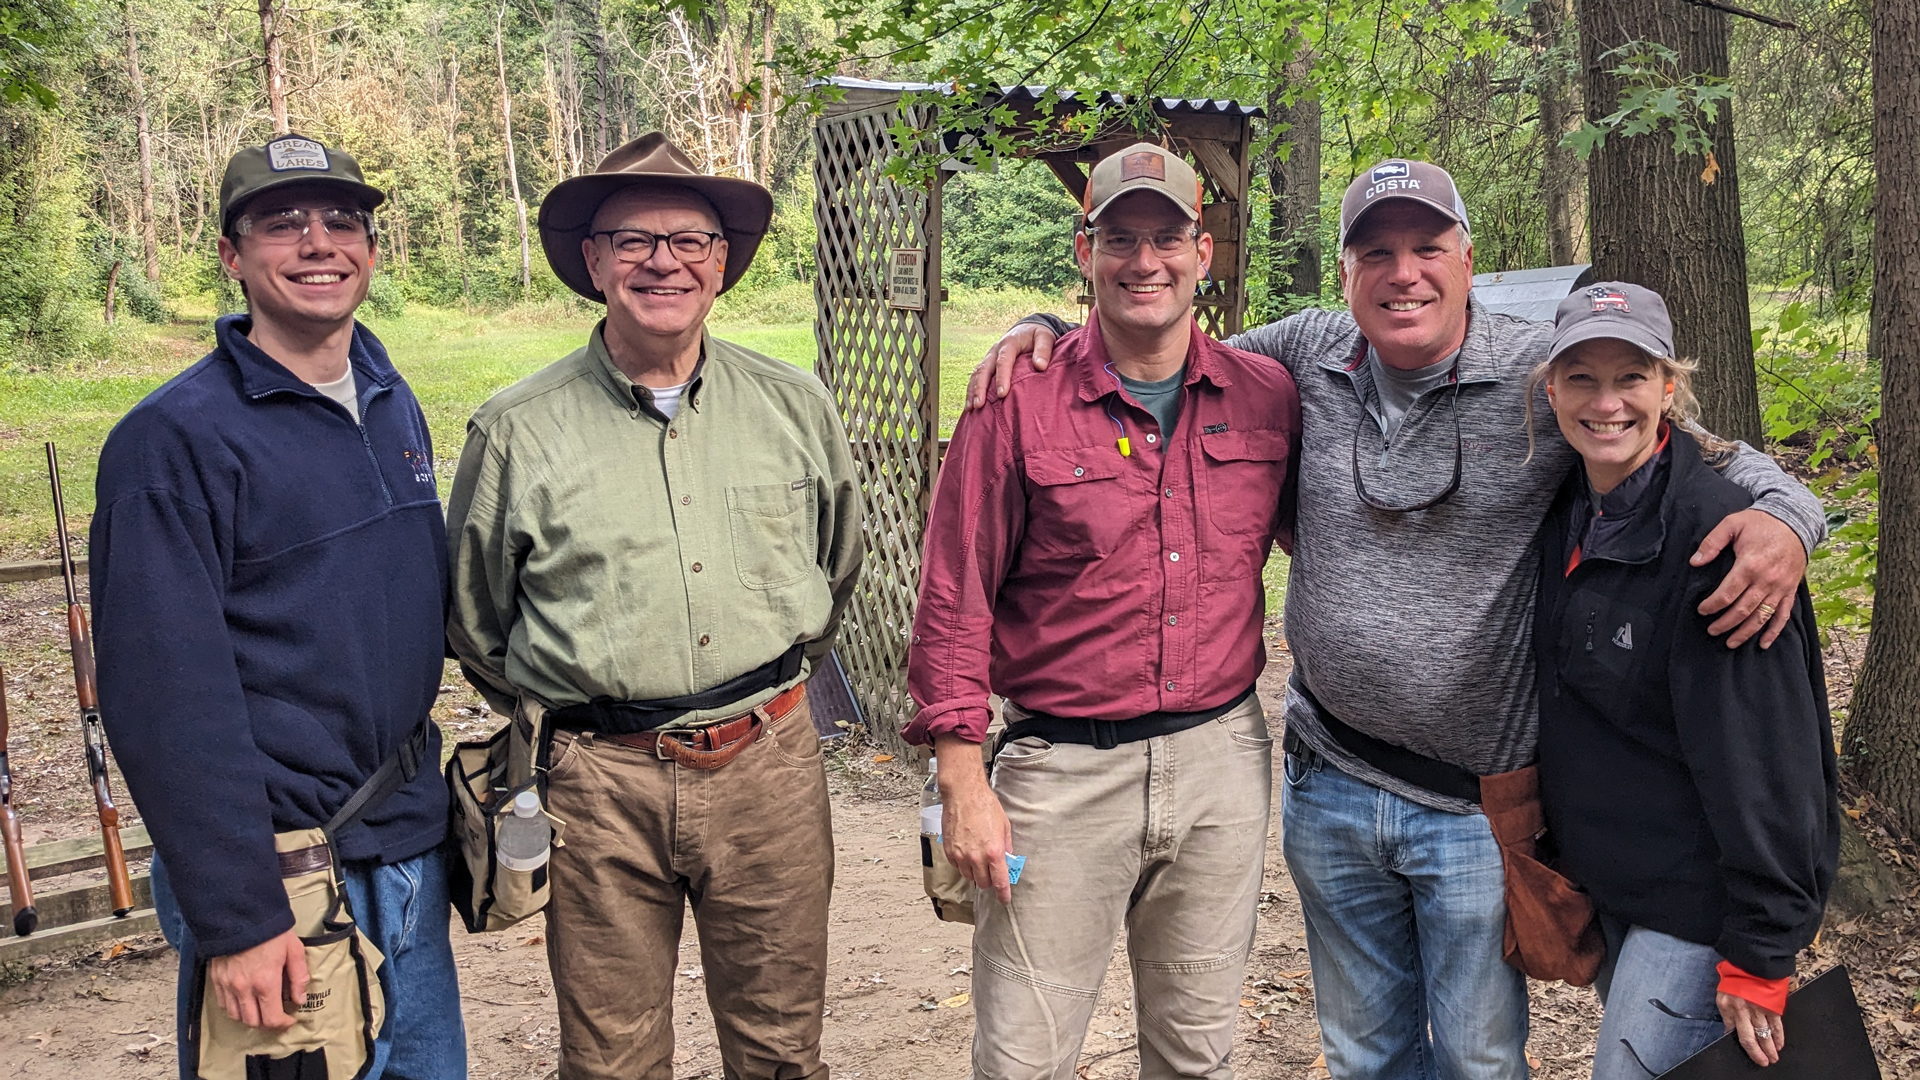 A group of attendees at the Sporting Clay Shoot